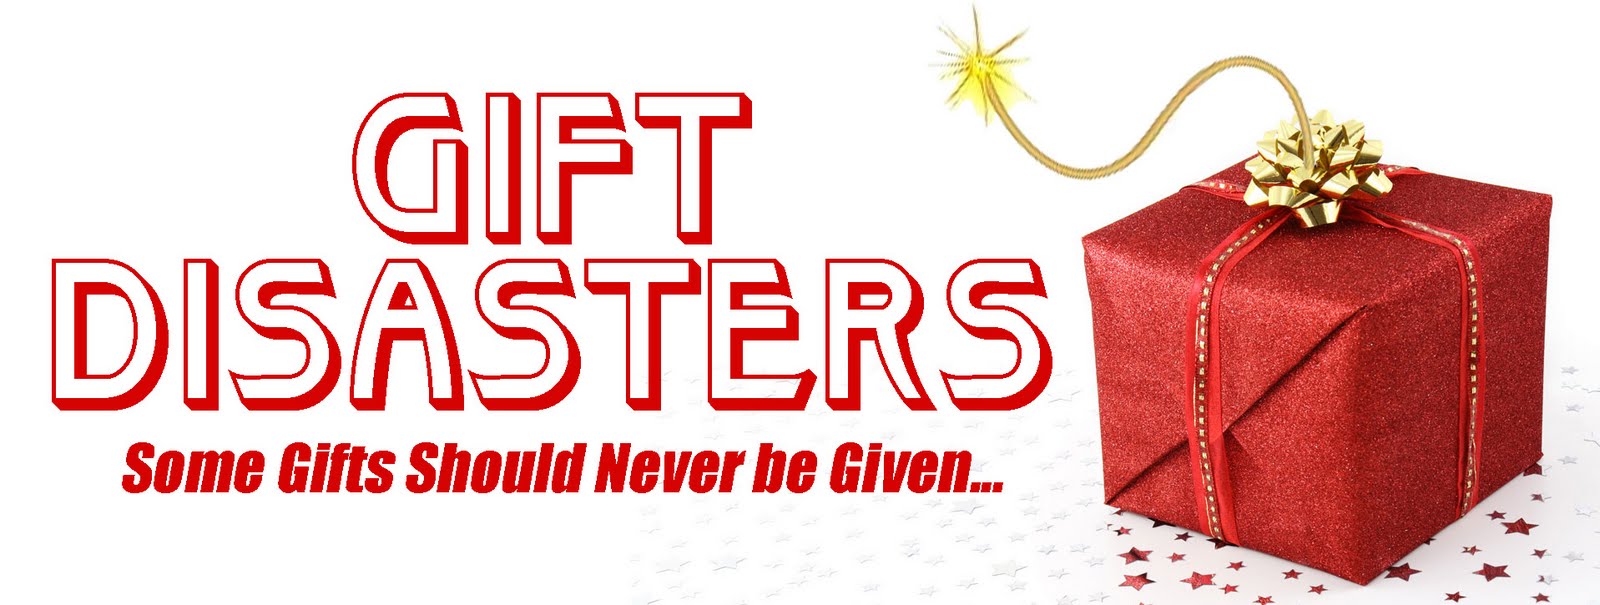 Gift Disasters